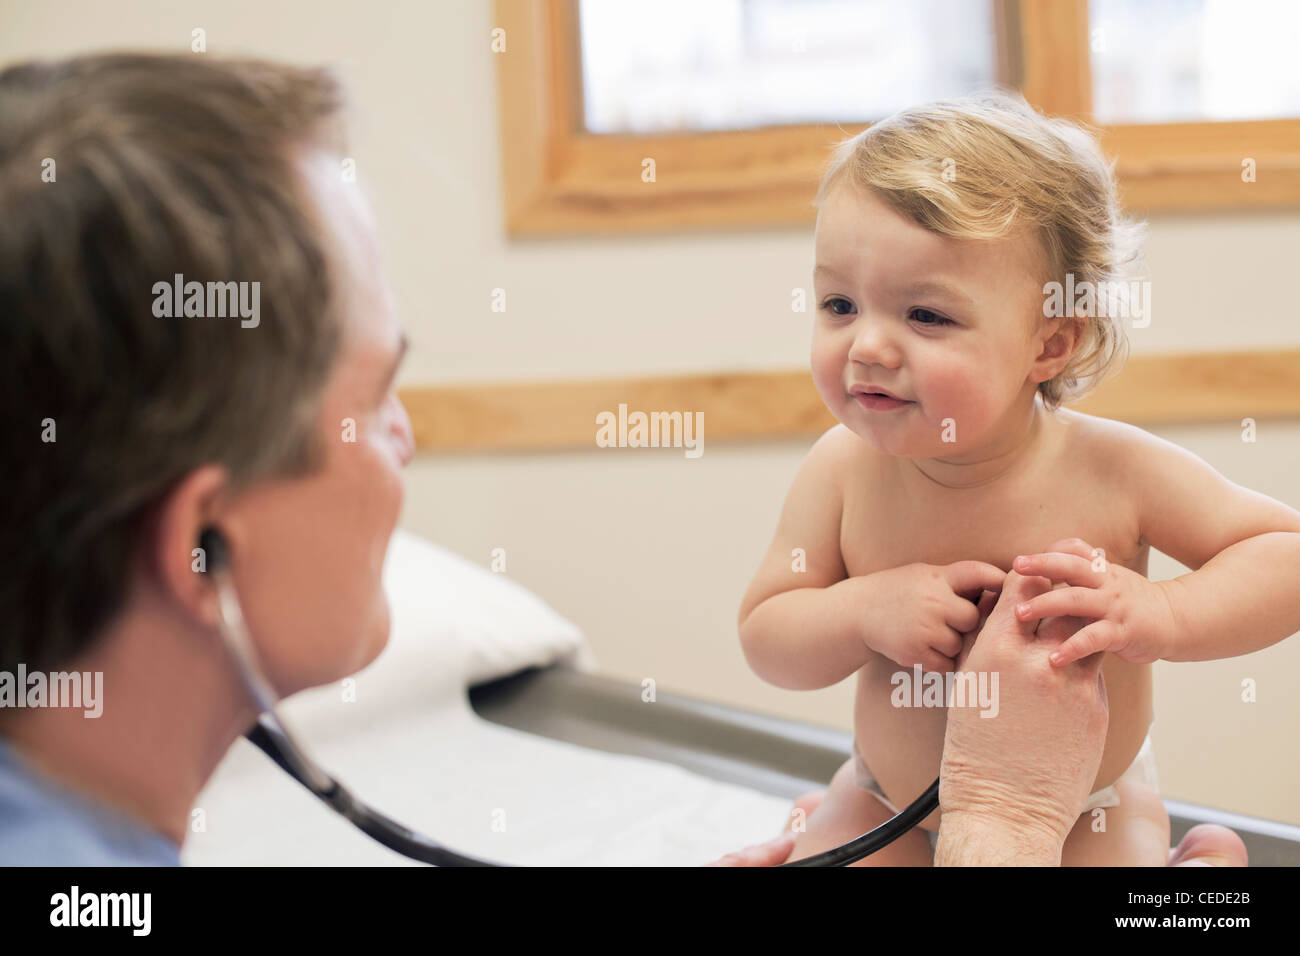 Doctor listening to toddler boy's heart during exam. Stock Photo